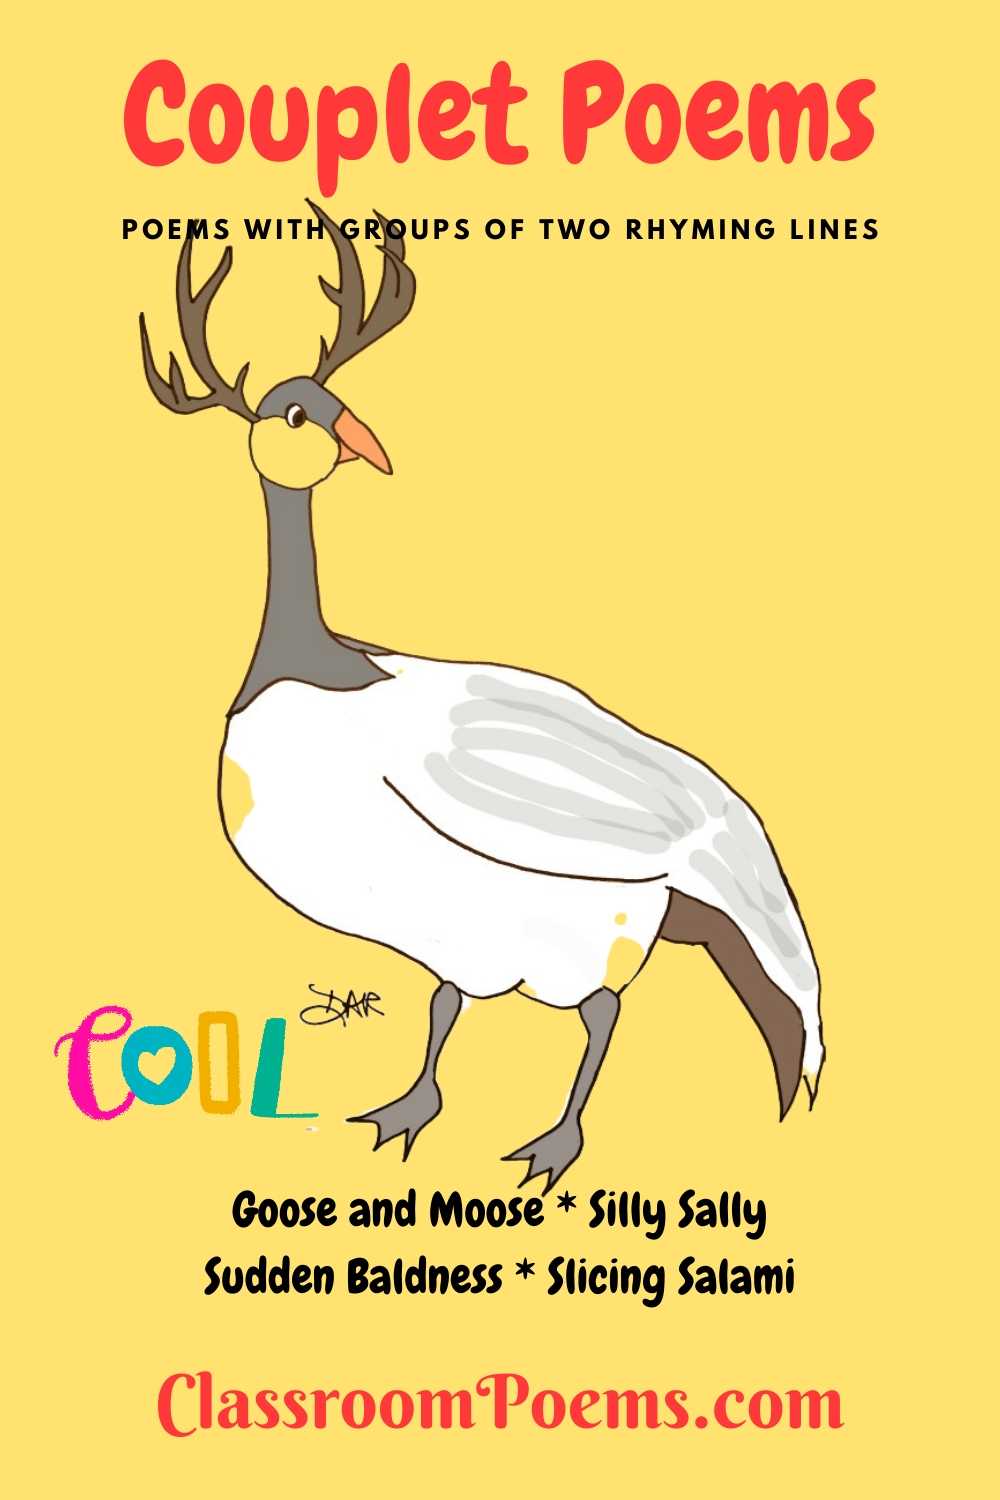 GOOSE AND MOOSE couplet poem by Denise Rodgers on ClassroomPoems.com.